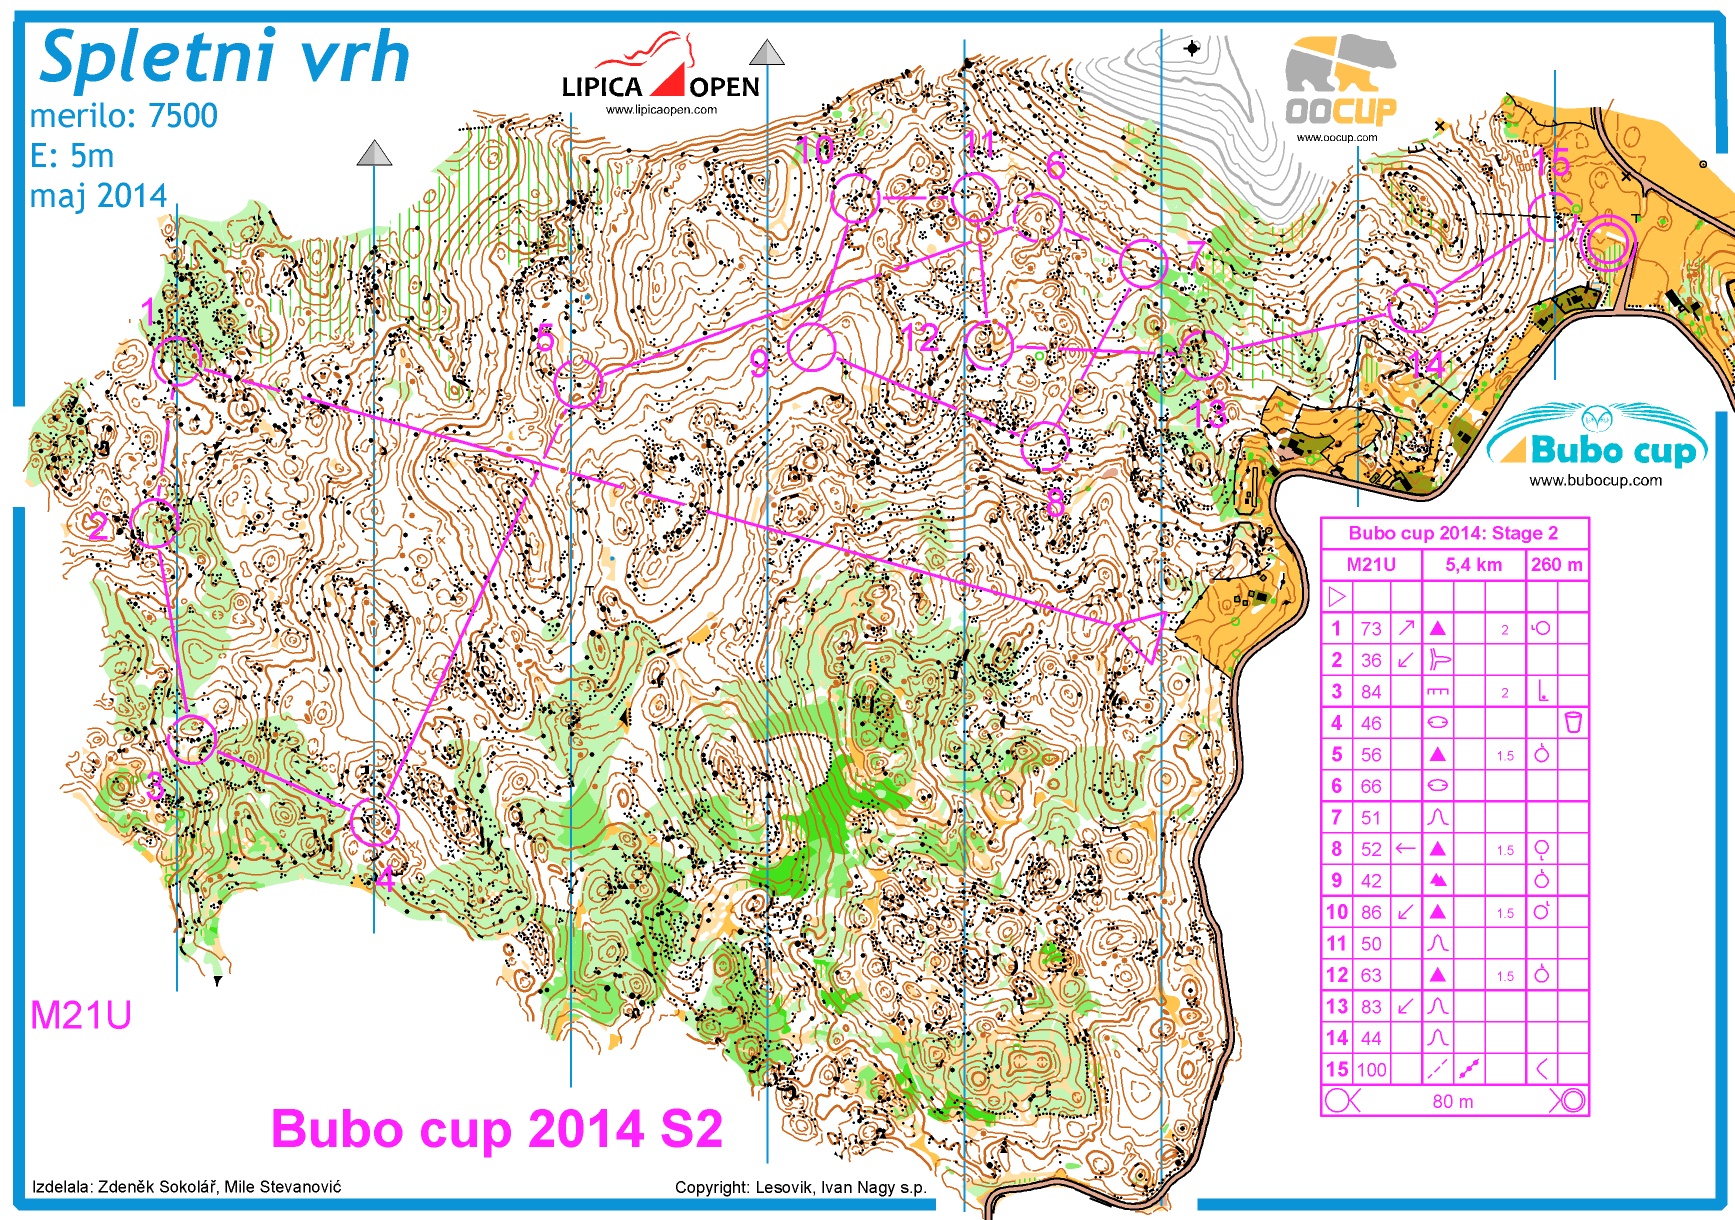 Bubo cup 2014 M21U Stage2 (2014-07-25)